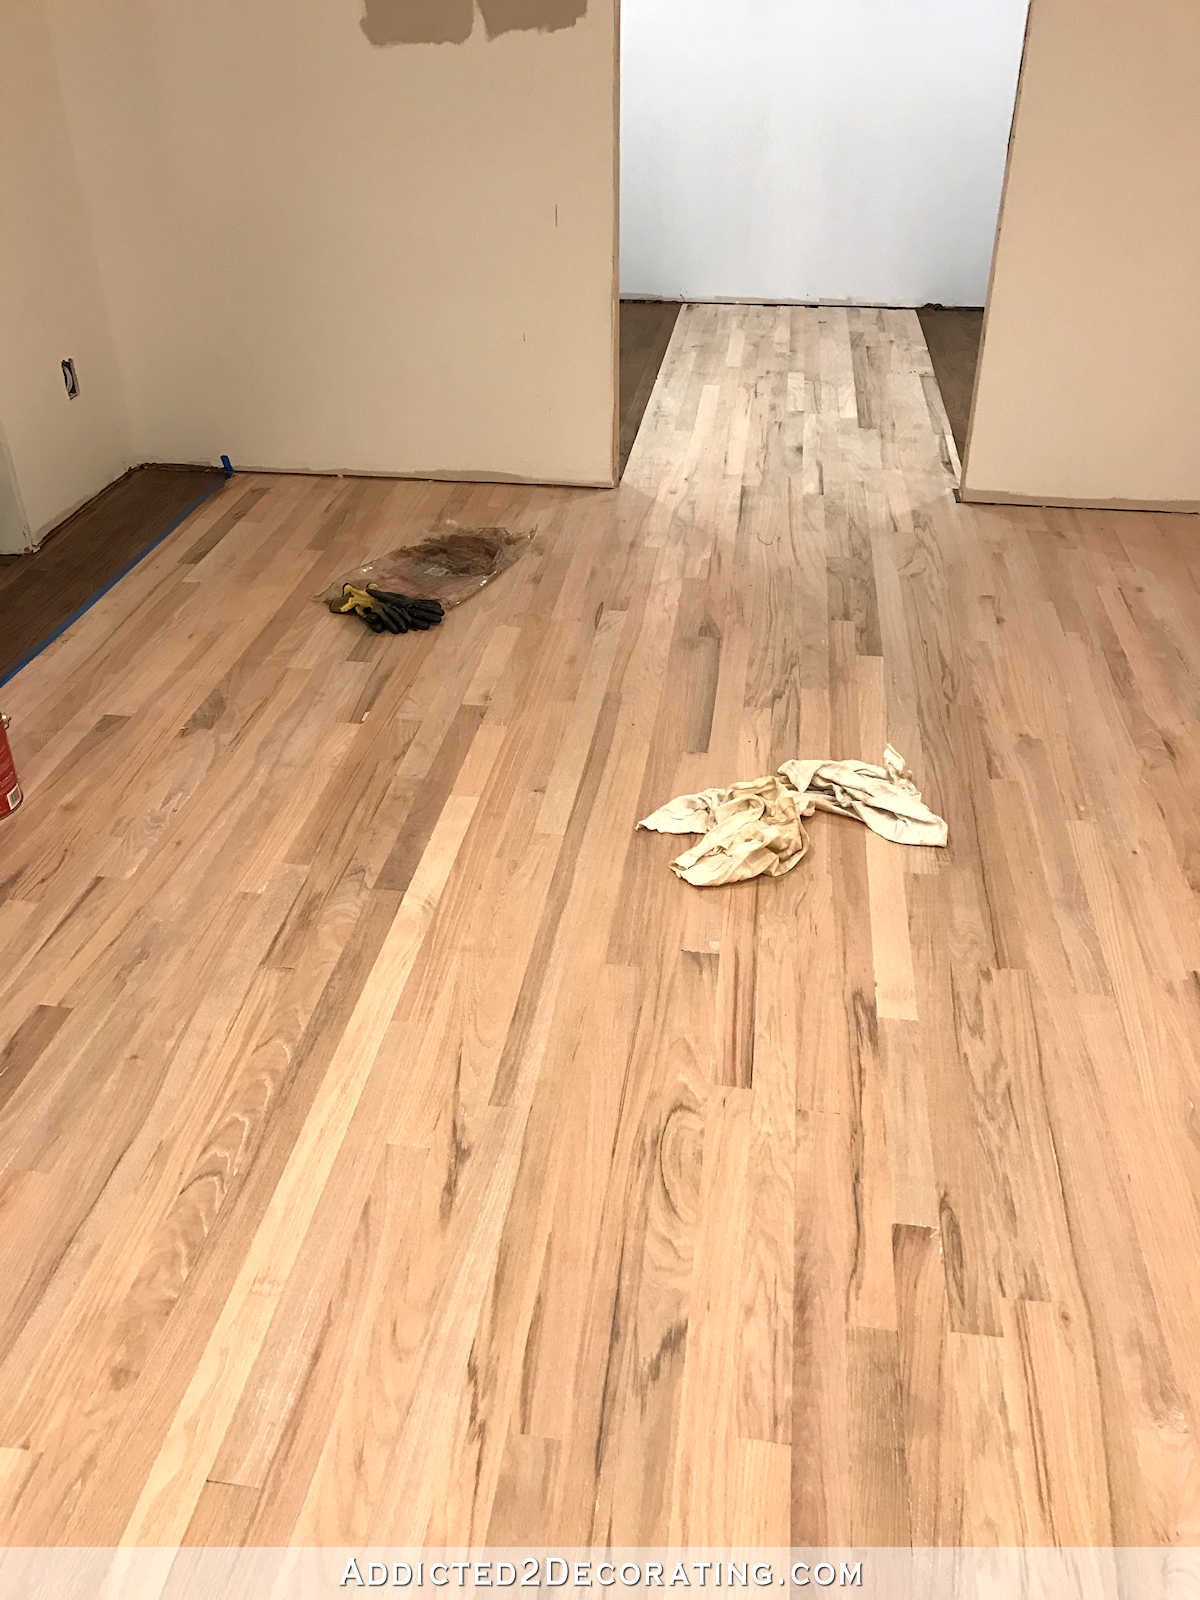 24 Recommended How Long Does It Take to Refinish Hardwood Floors 2023 free download how long does it take to refinish hardwood floors of adventures in staining my red oak hardwood floors products process for staining red oak hardwood floors 12 breakfast room and center of p